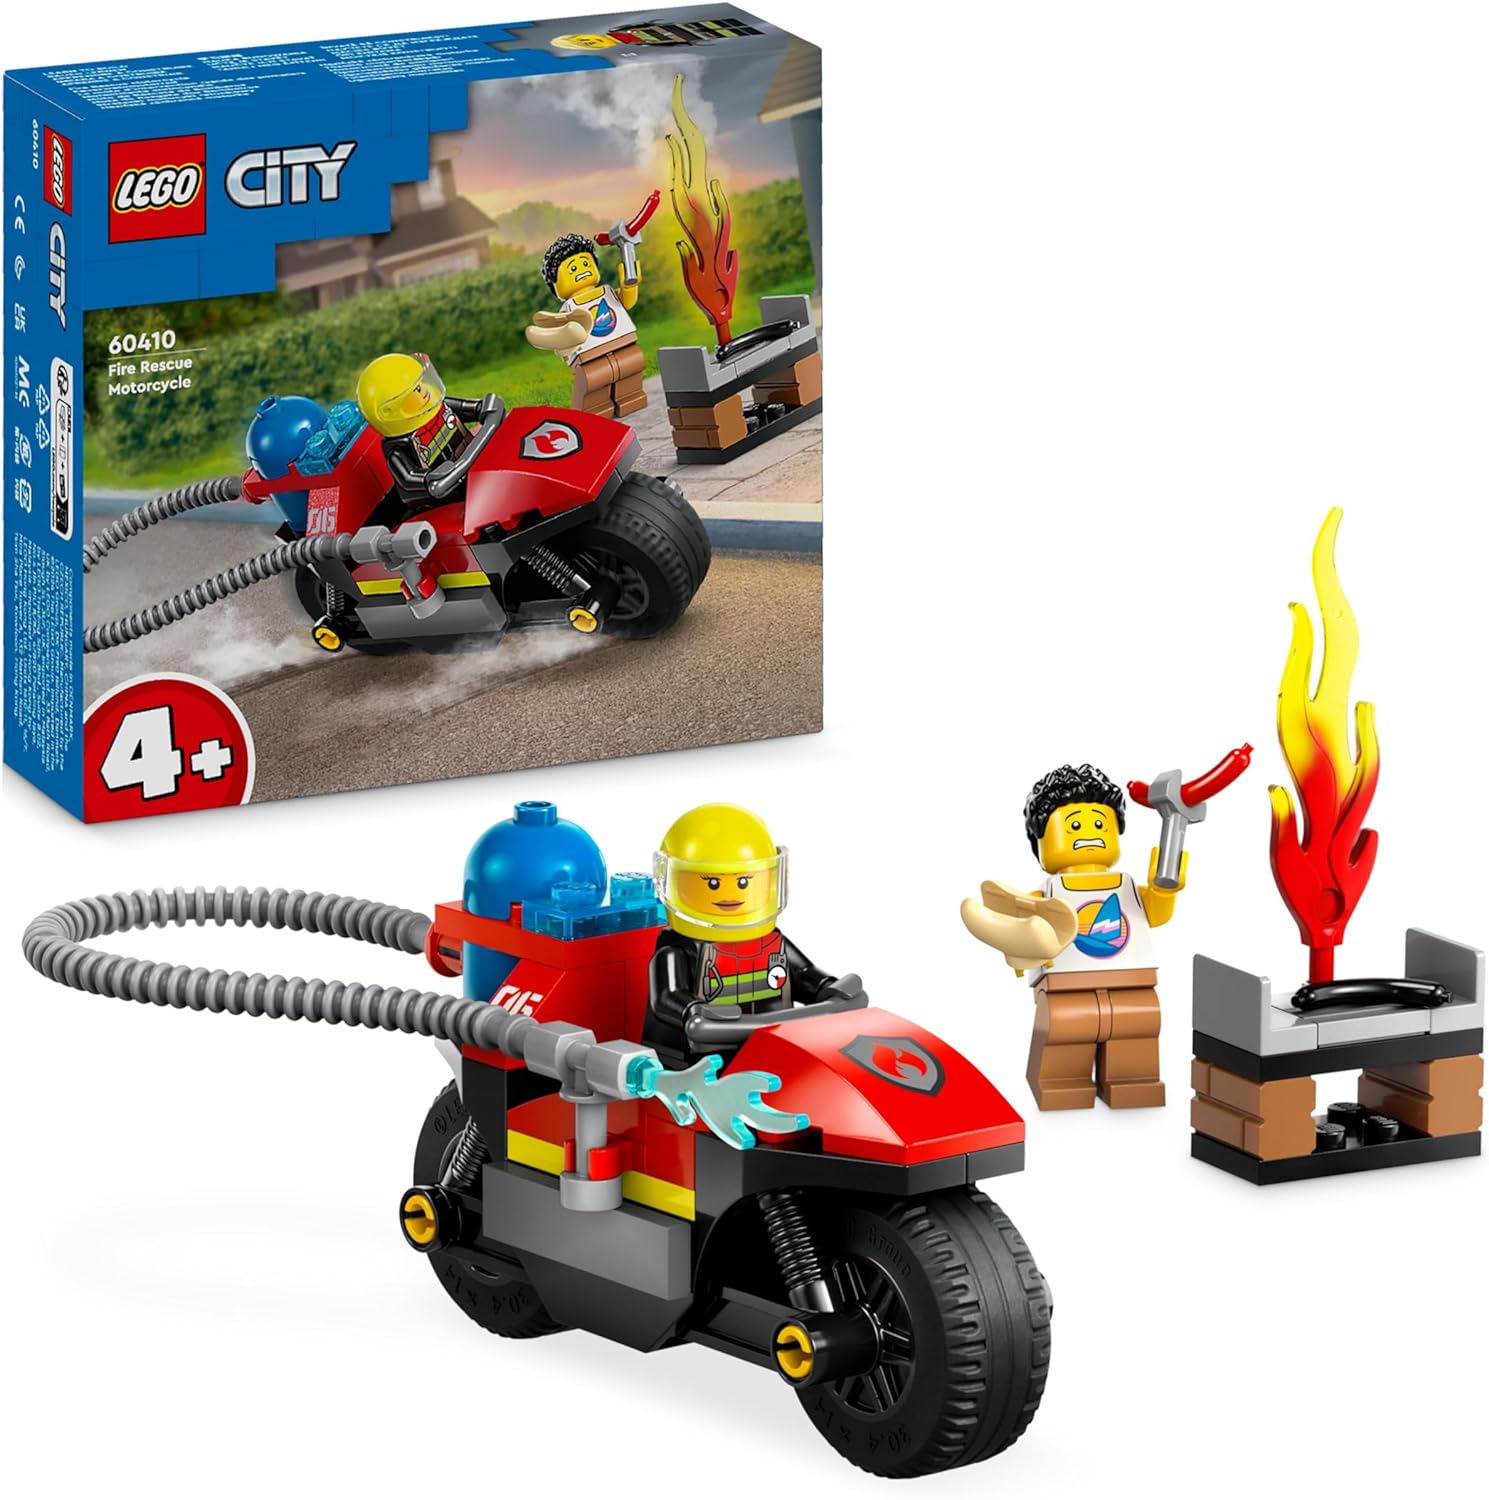 LEGO City 60410 Fire Engine Motorcycle, Fire Engine Toy for Children from 4 Years with Motorcycle and 2 Mini Figures Including Firefighter, Imaginative Playing Experience, Gift for Boys and Girls